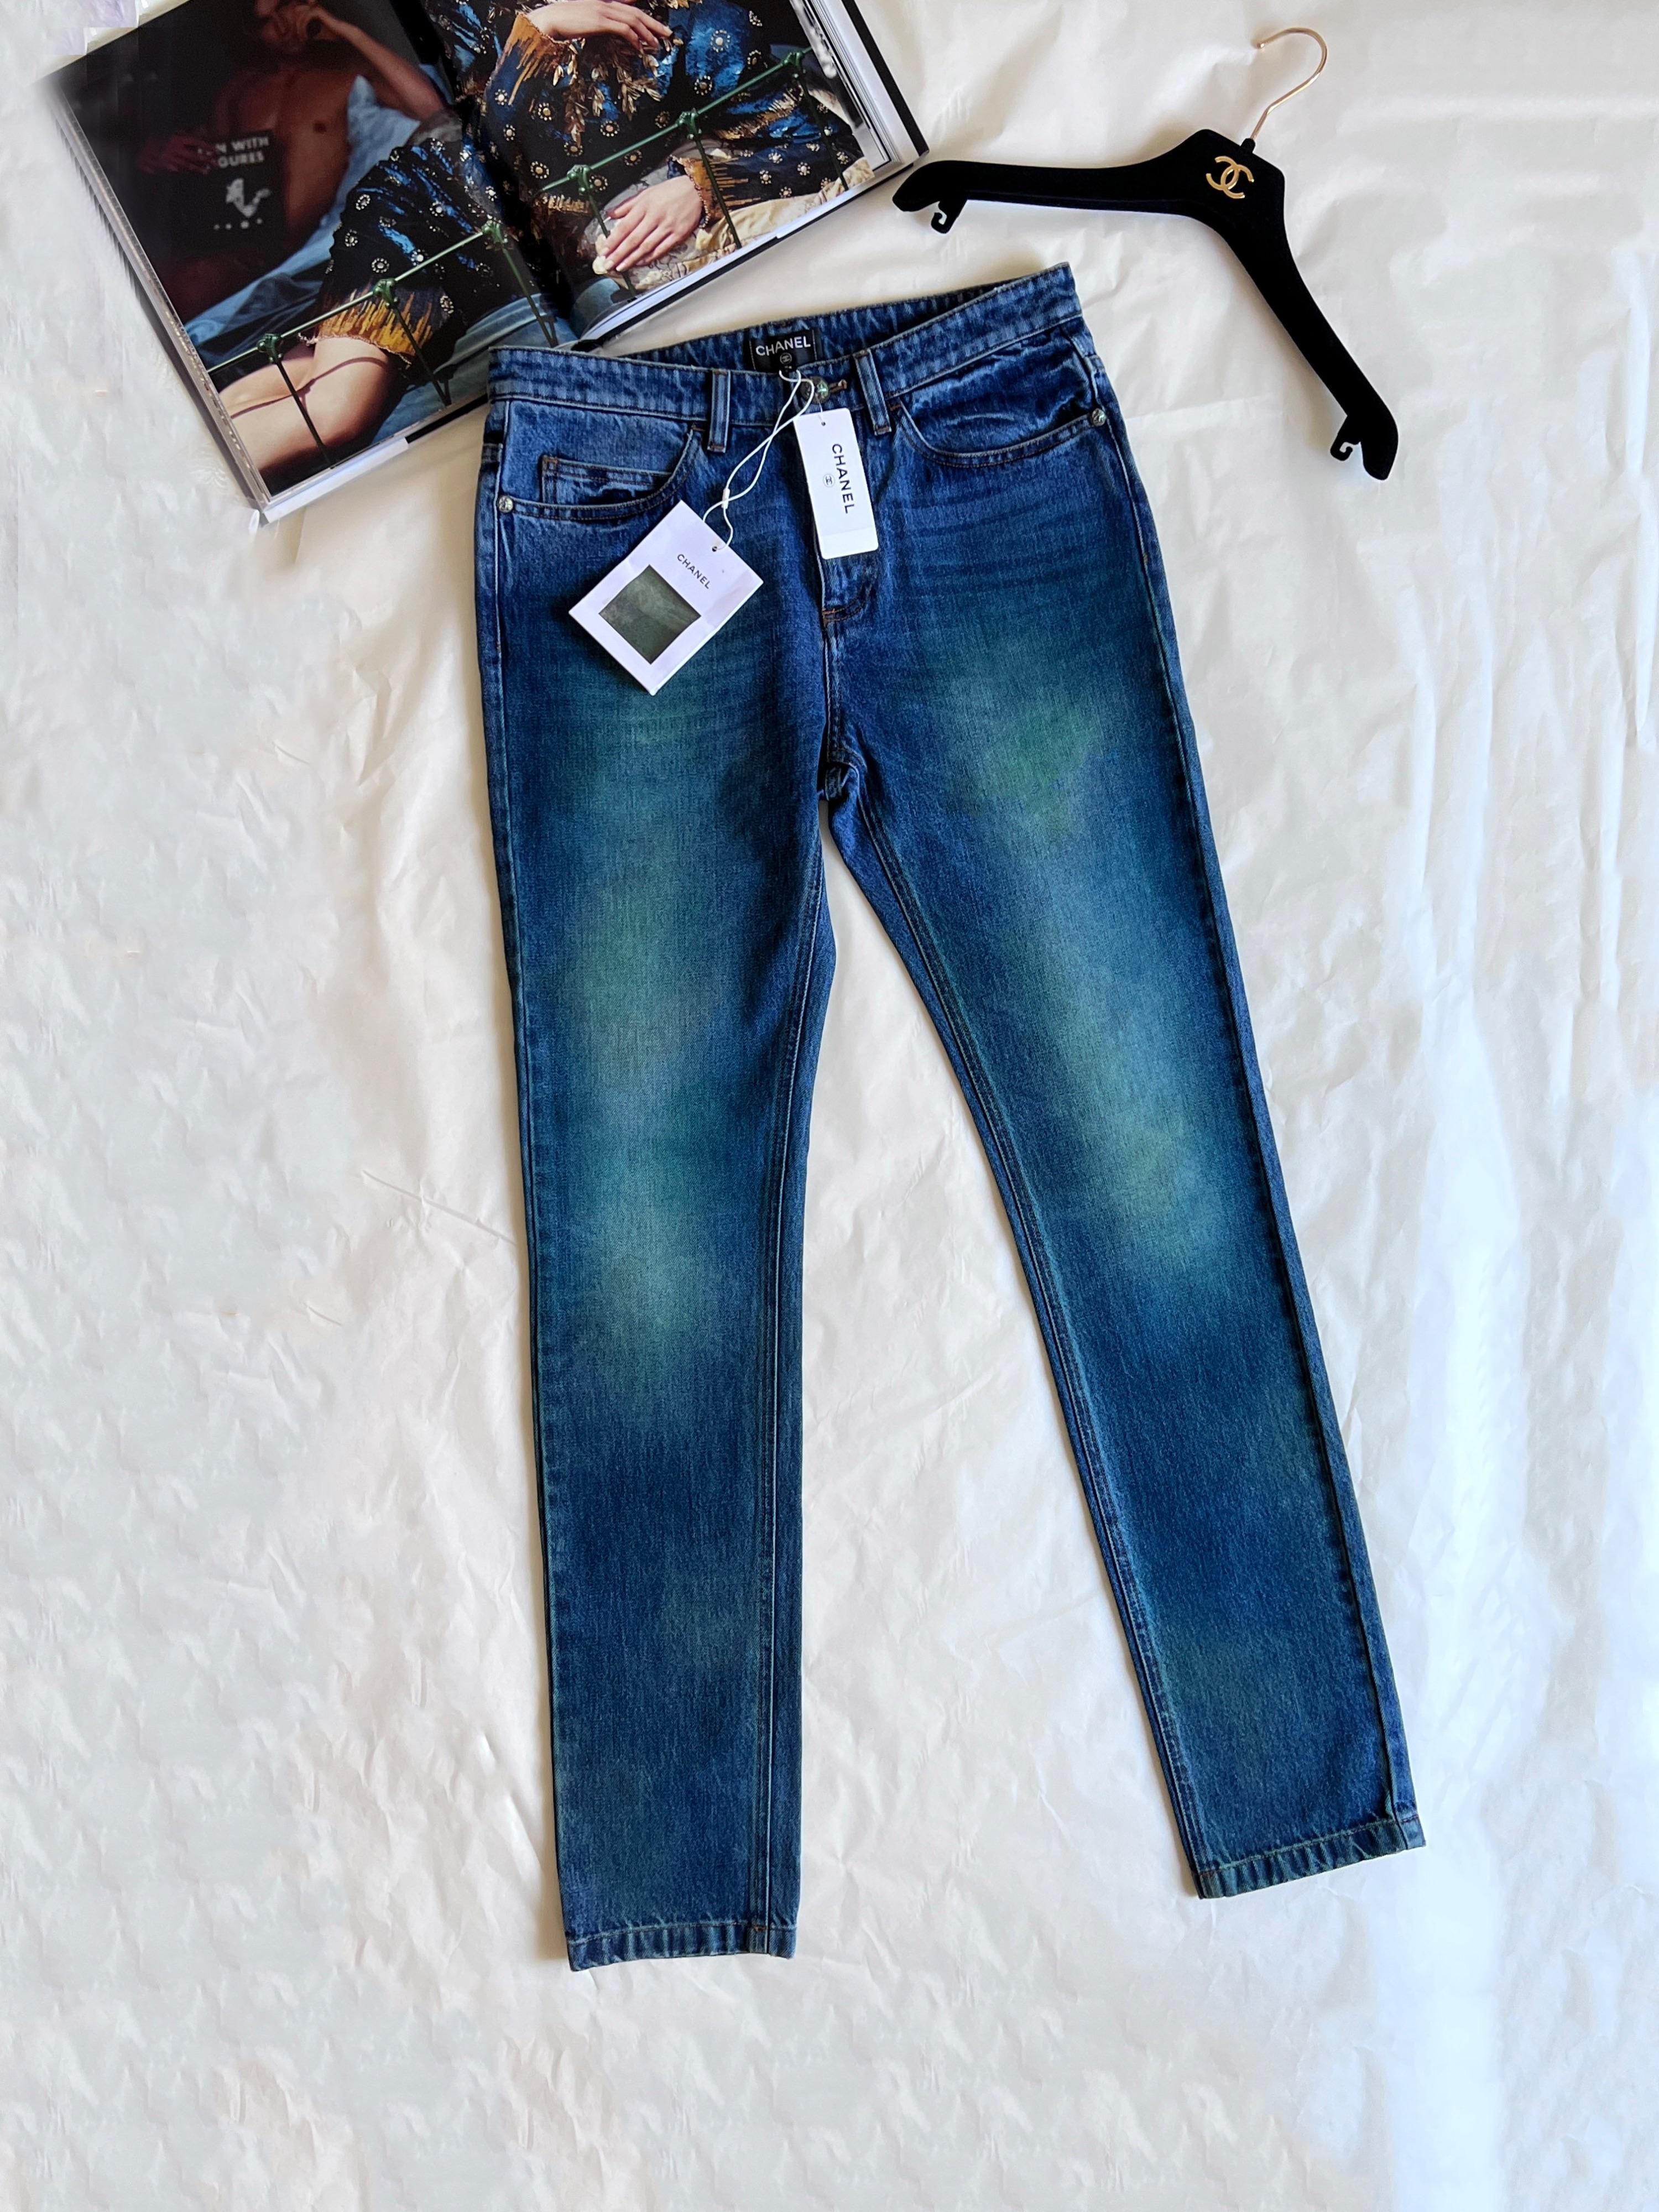 Chanel Cuba Collection Washed Jeans 1